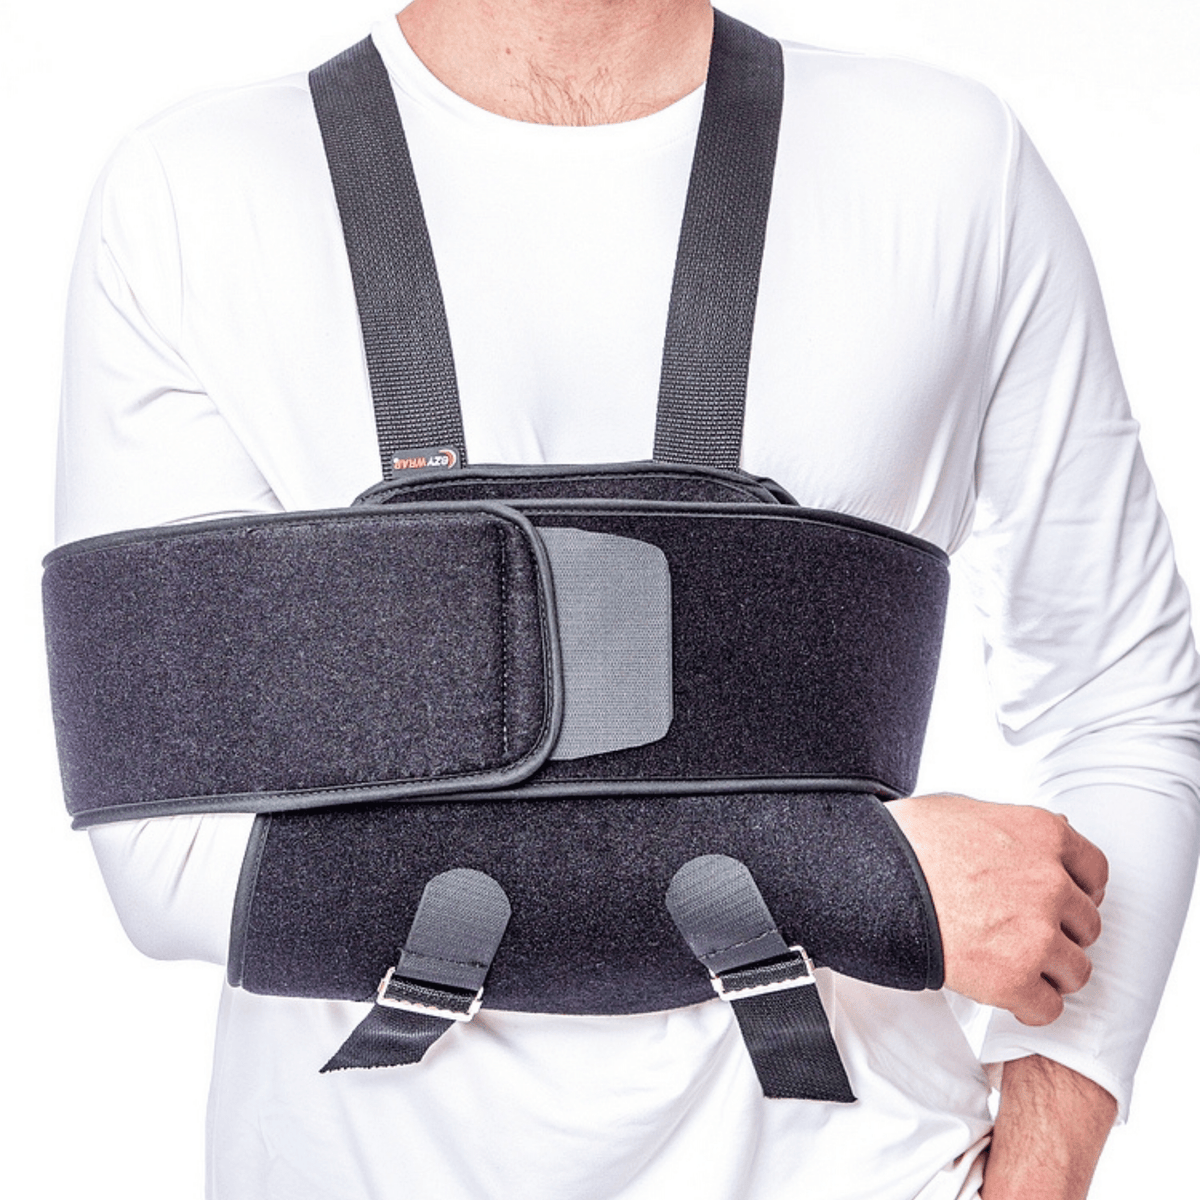 Vission™ Sling and Swathe, Slings & Splints, Products